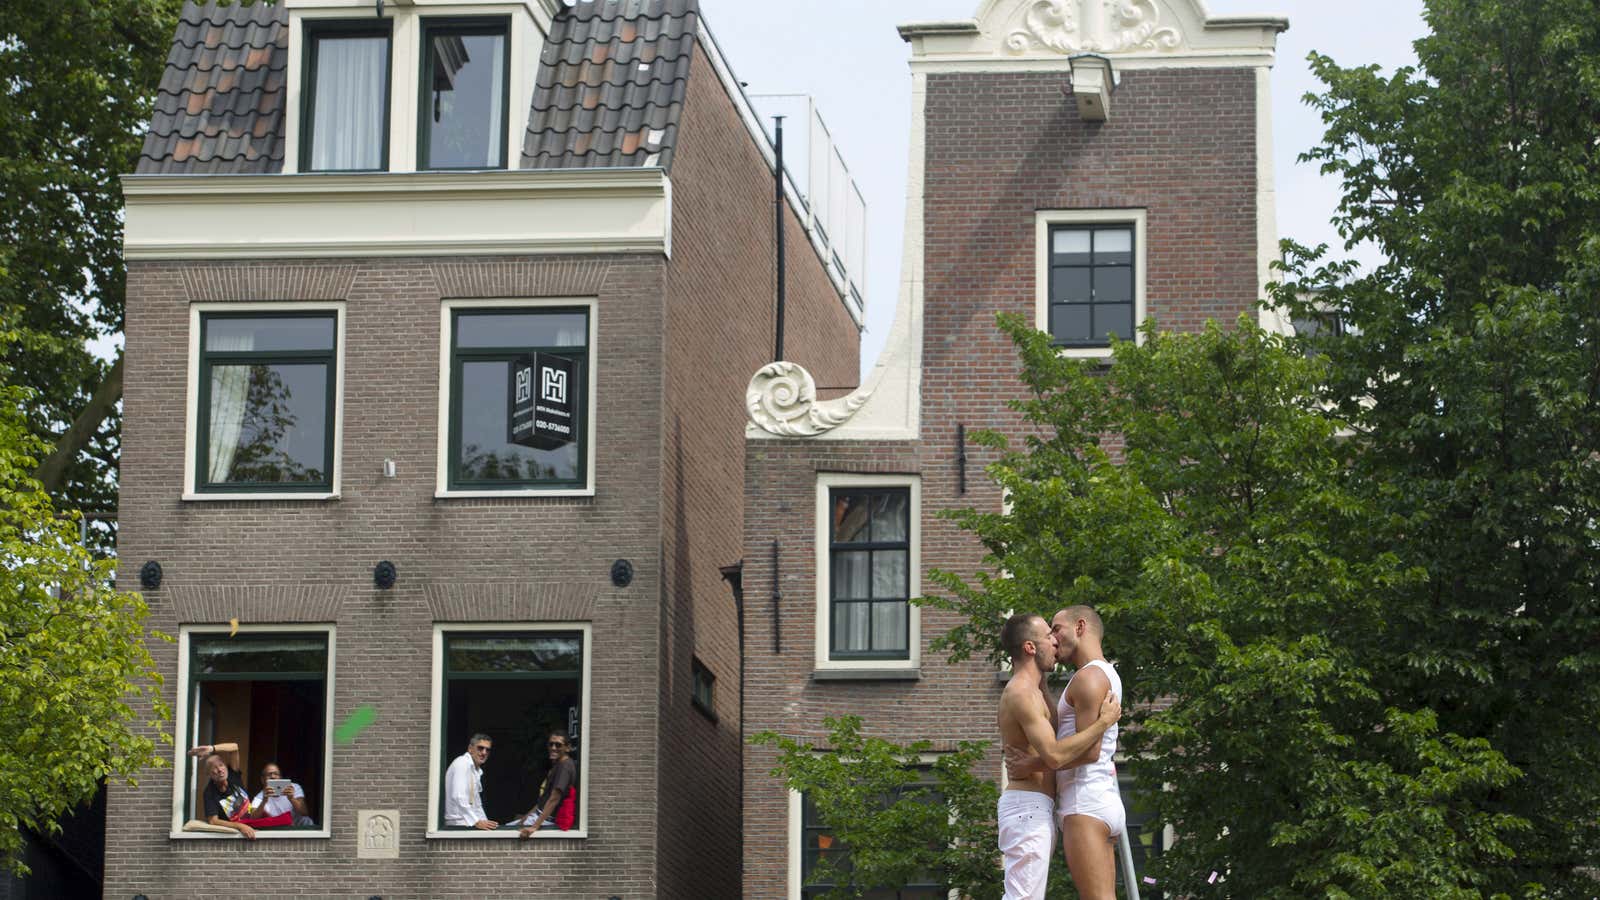 Amsterdam has long been a global gay capital.